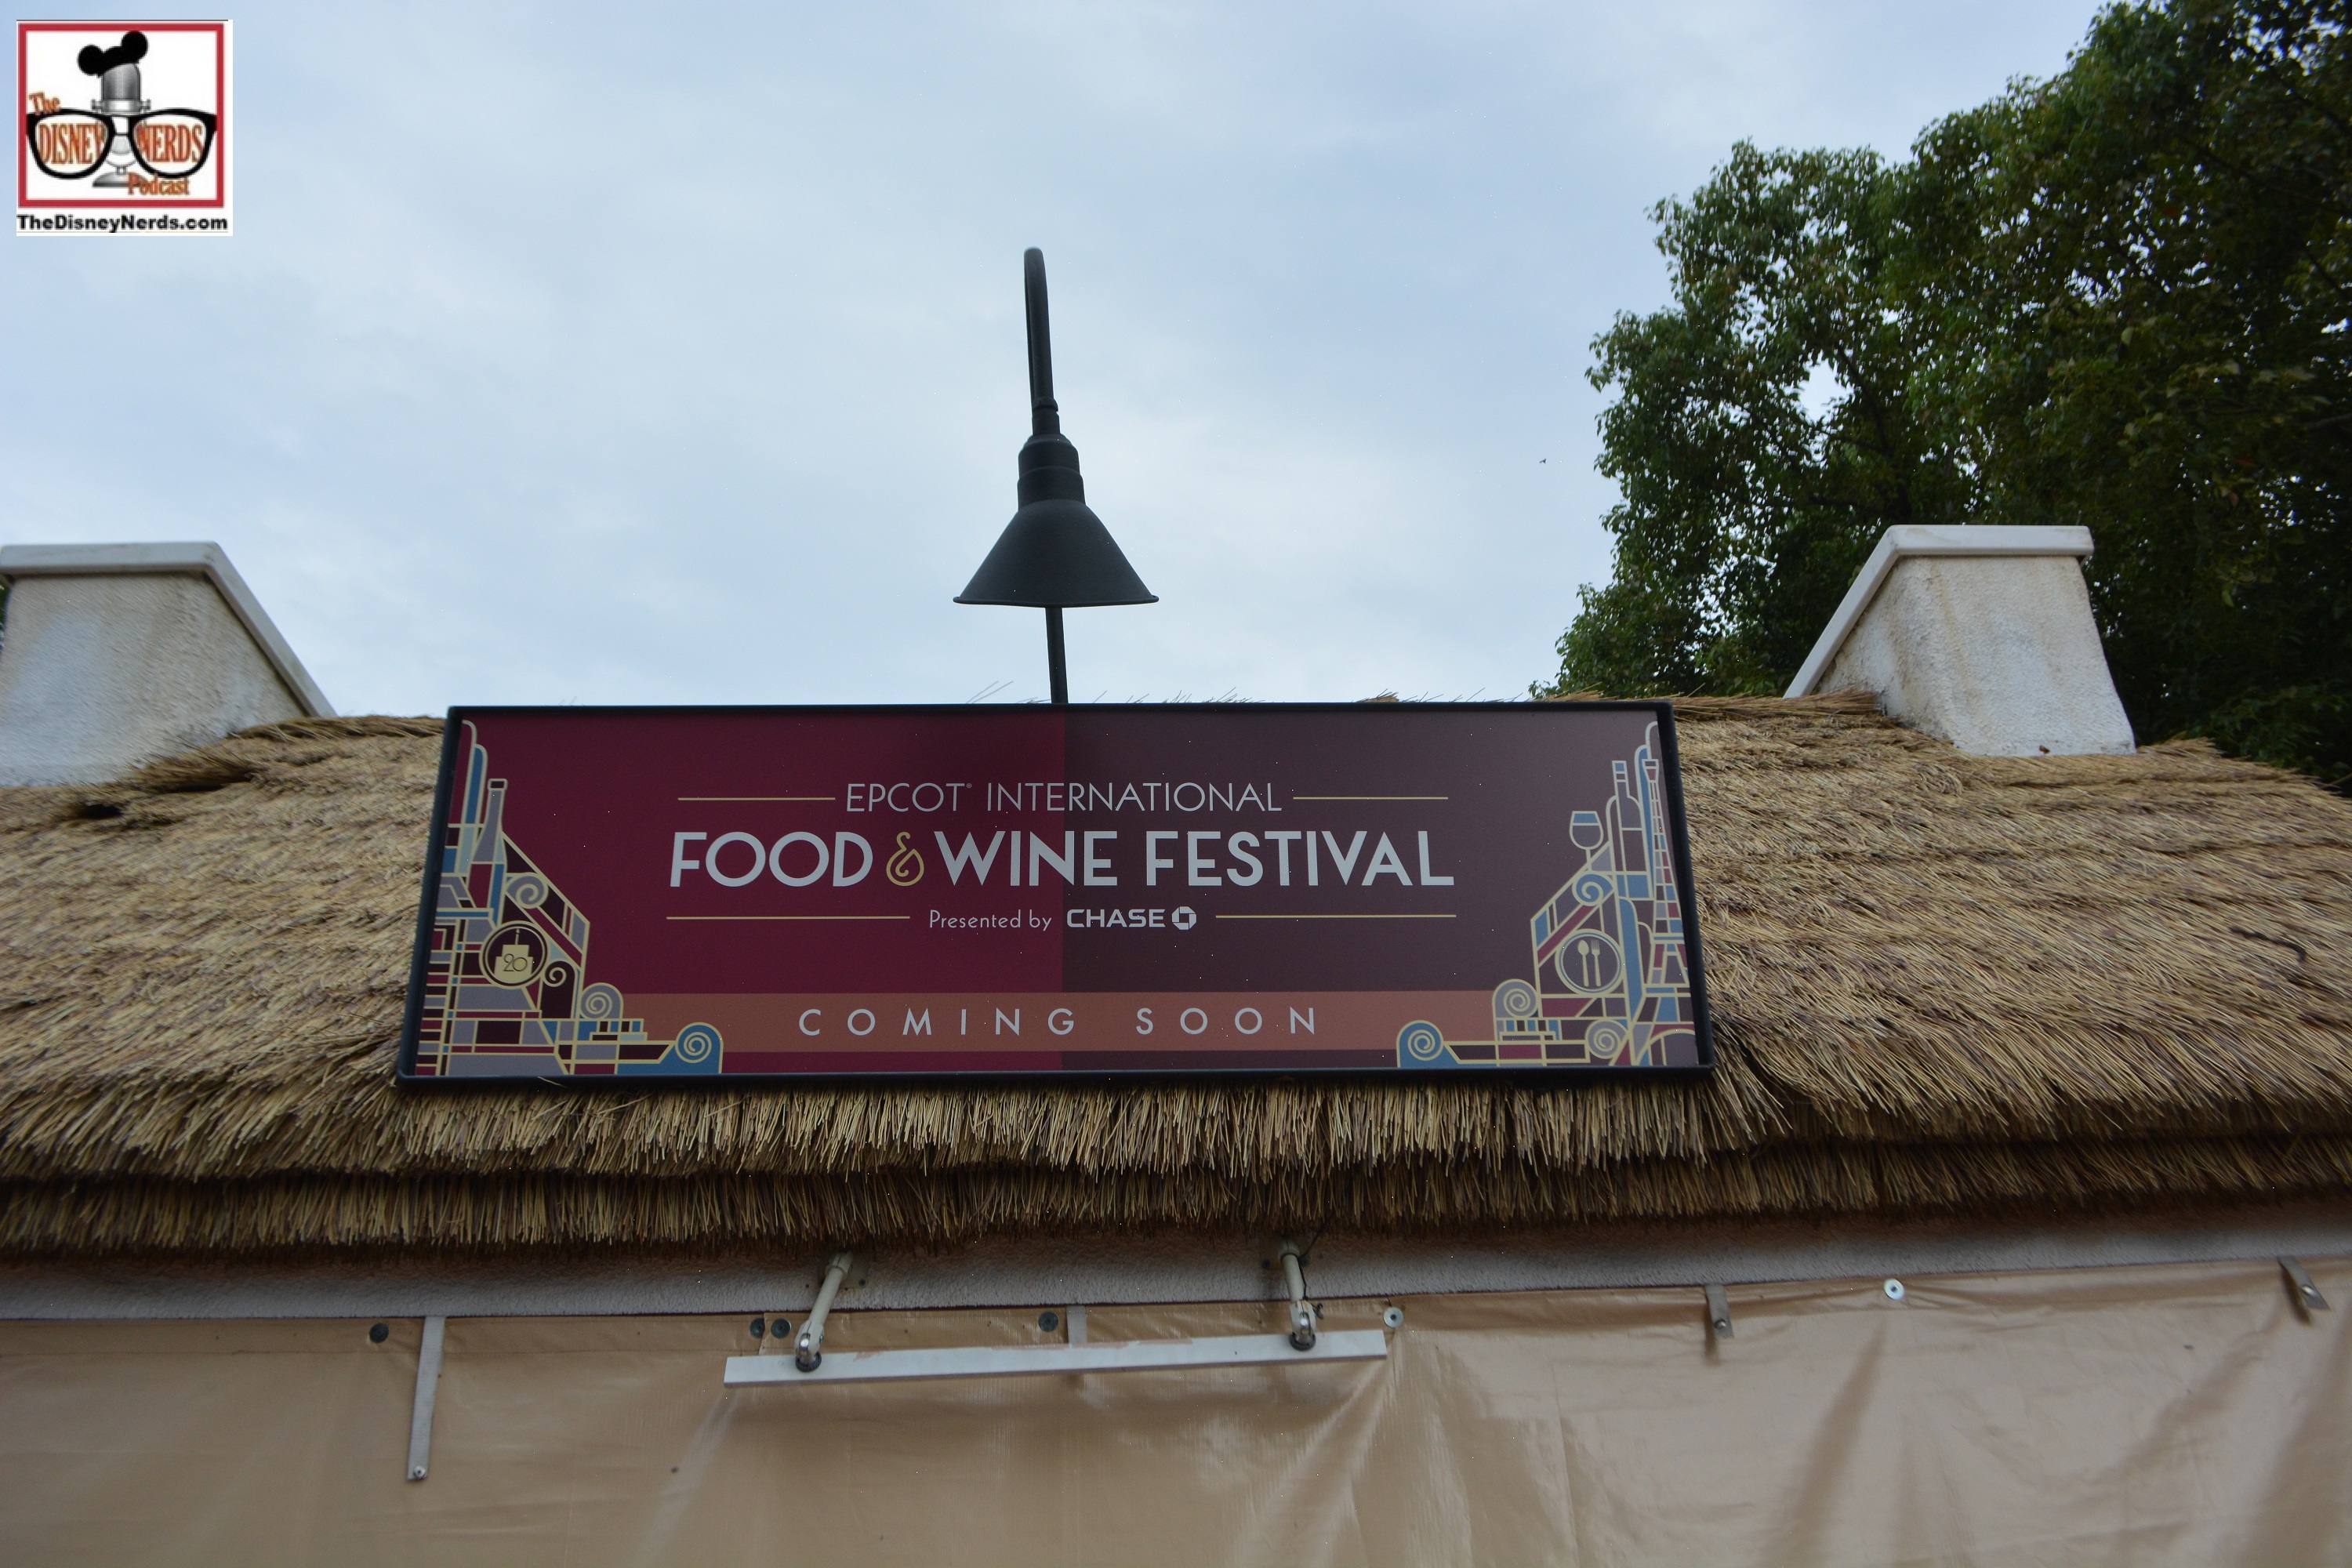 Epcot is gearing up for the food and wine festival... feels so empty with no booth open..